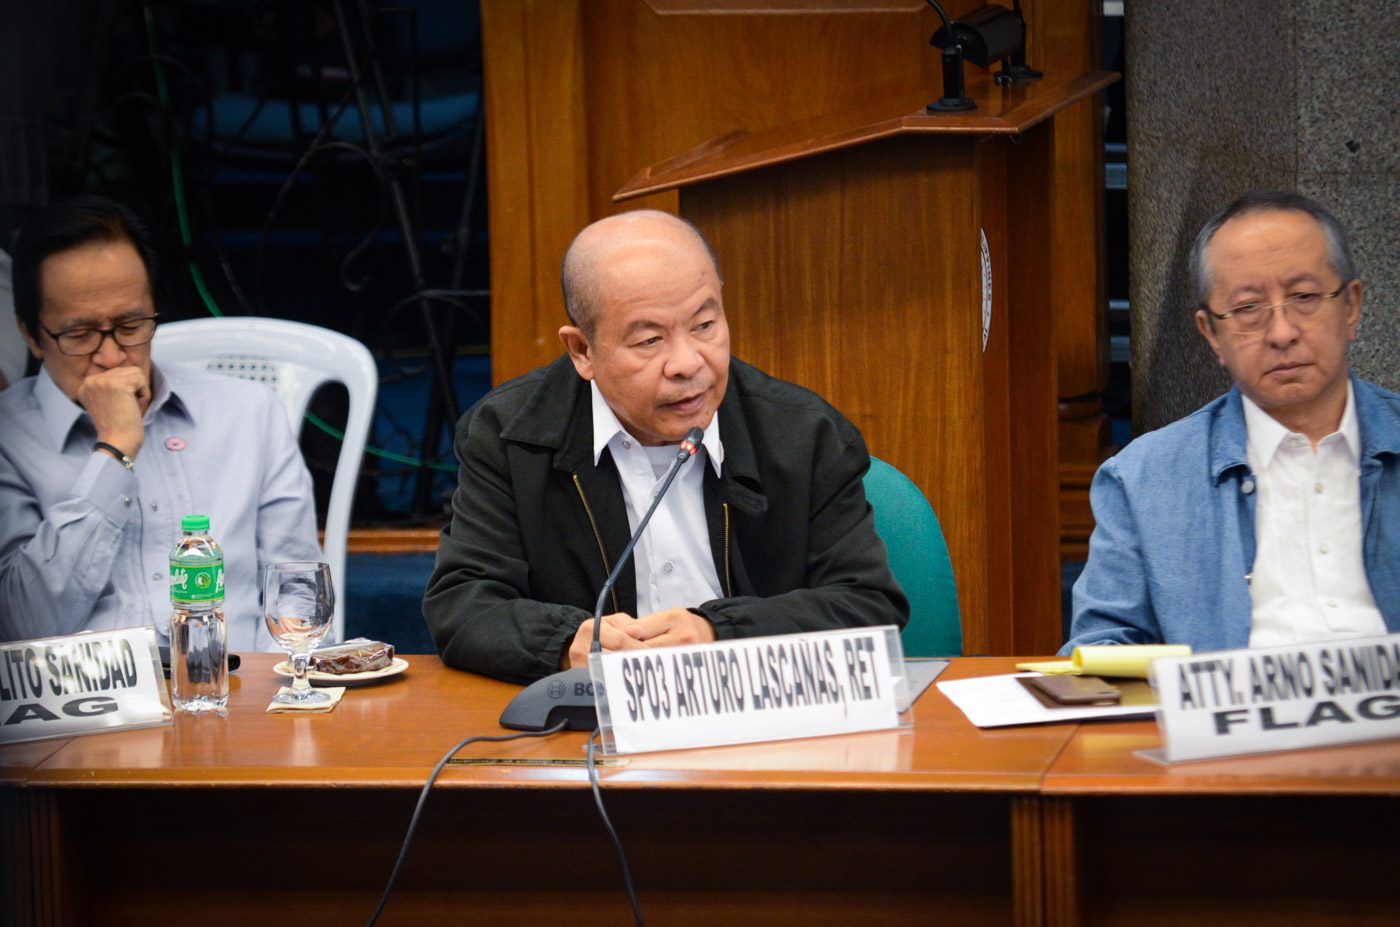 DDS WHISTLEBLOWER. Retired police SPO3 Arthur Lascanas with FLAG lawyers Pablito and Arno Sanidad during a hearing of the Senate committee on public order and dangerous drugs on March 6, 2017 on the existence of the Davao Death Squad. Photo by LeAnne Jazul/Rappler 